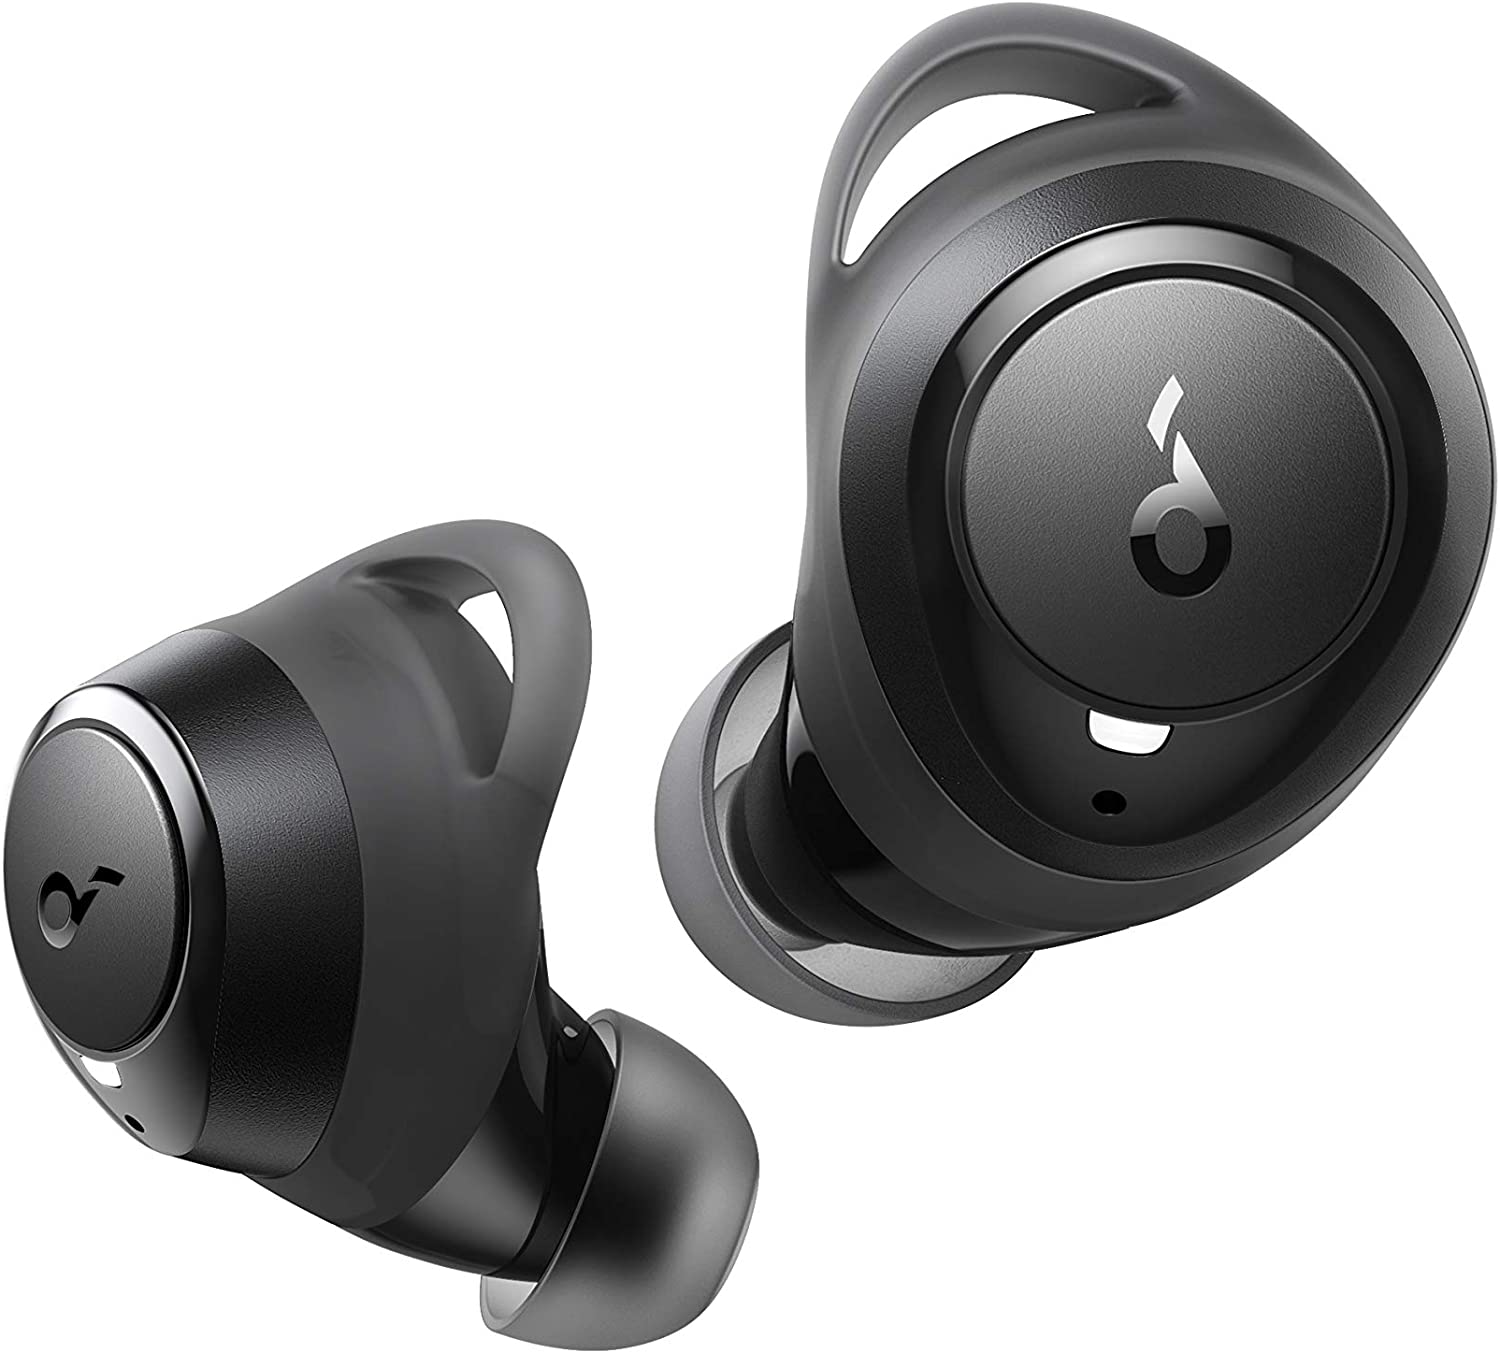 Anker Soundcore Life A1 True Wireless Earbuds $29.99 + Free Shipping